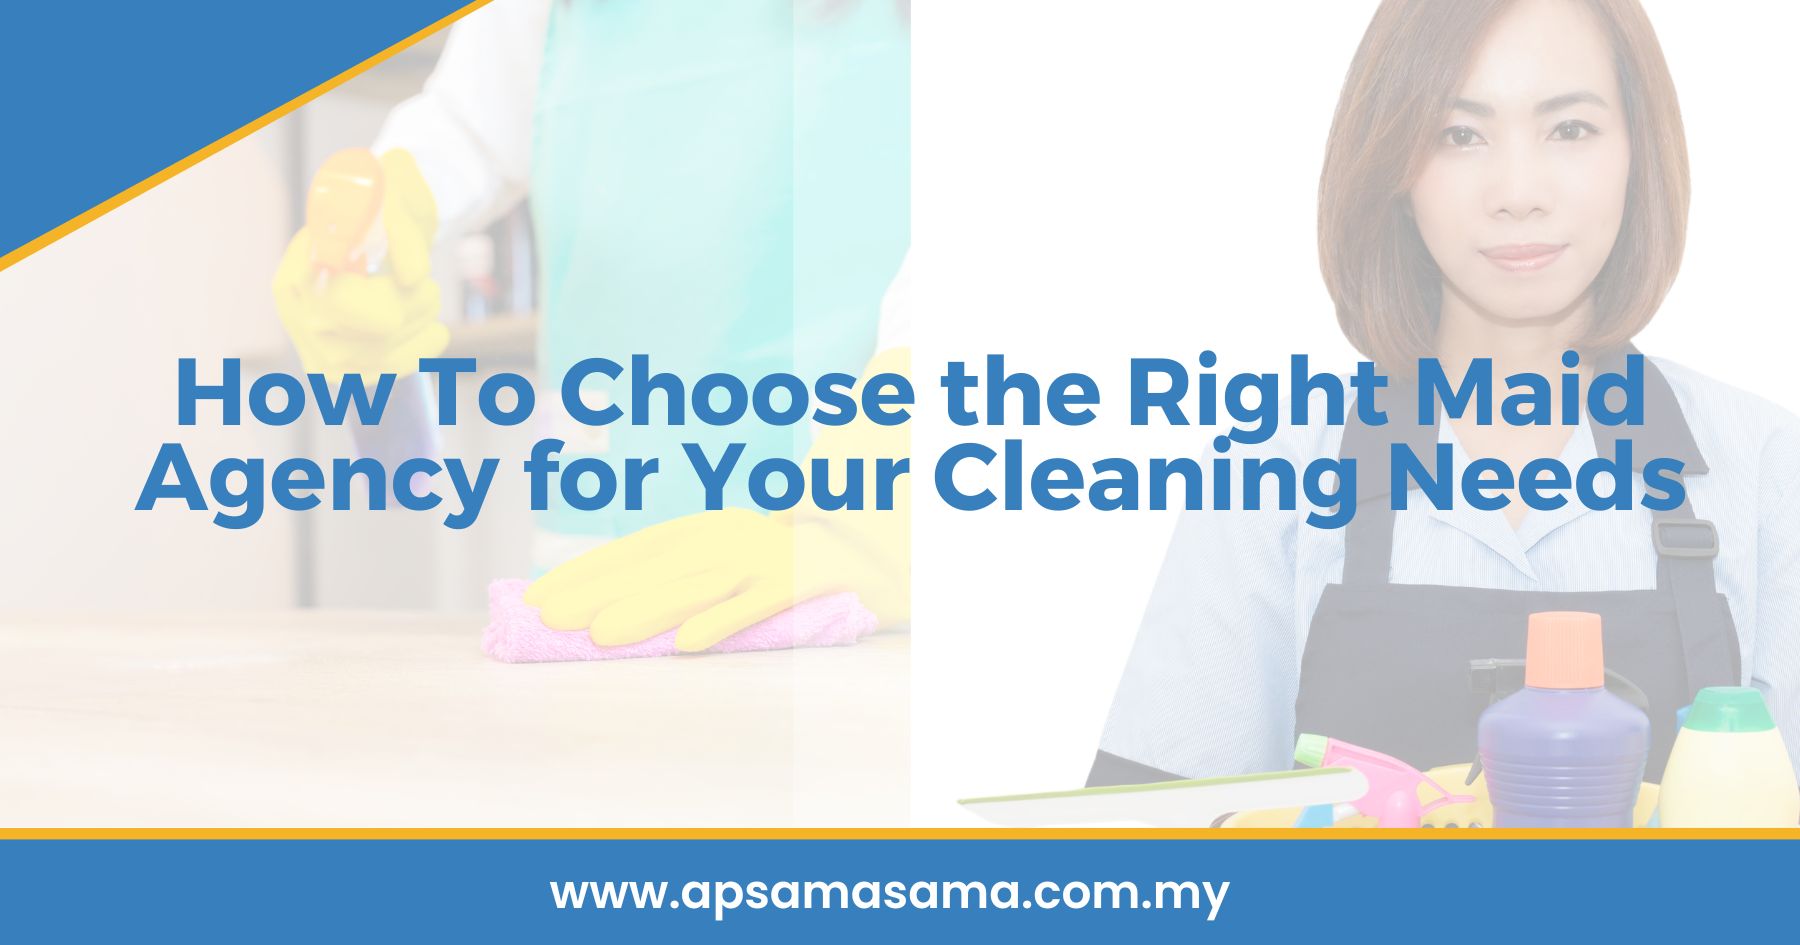 How To Choose the Right Maid Agency for Your Cleaning Needs